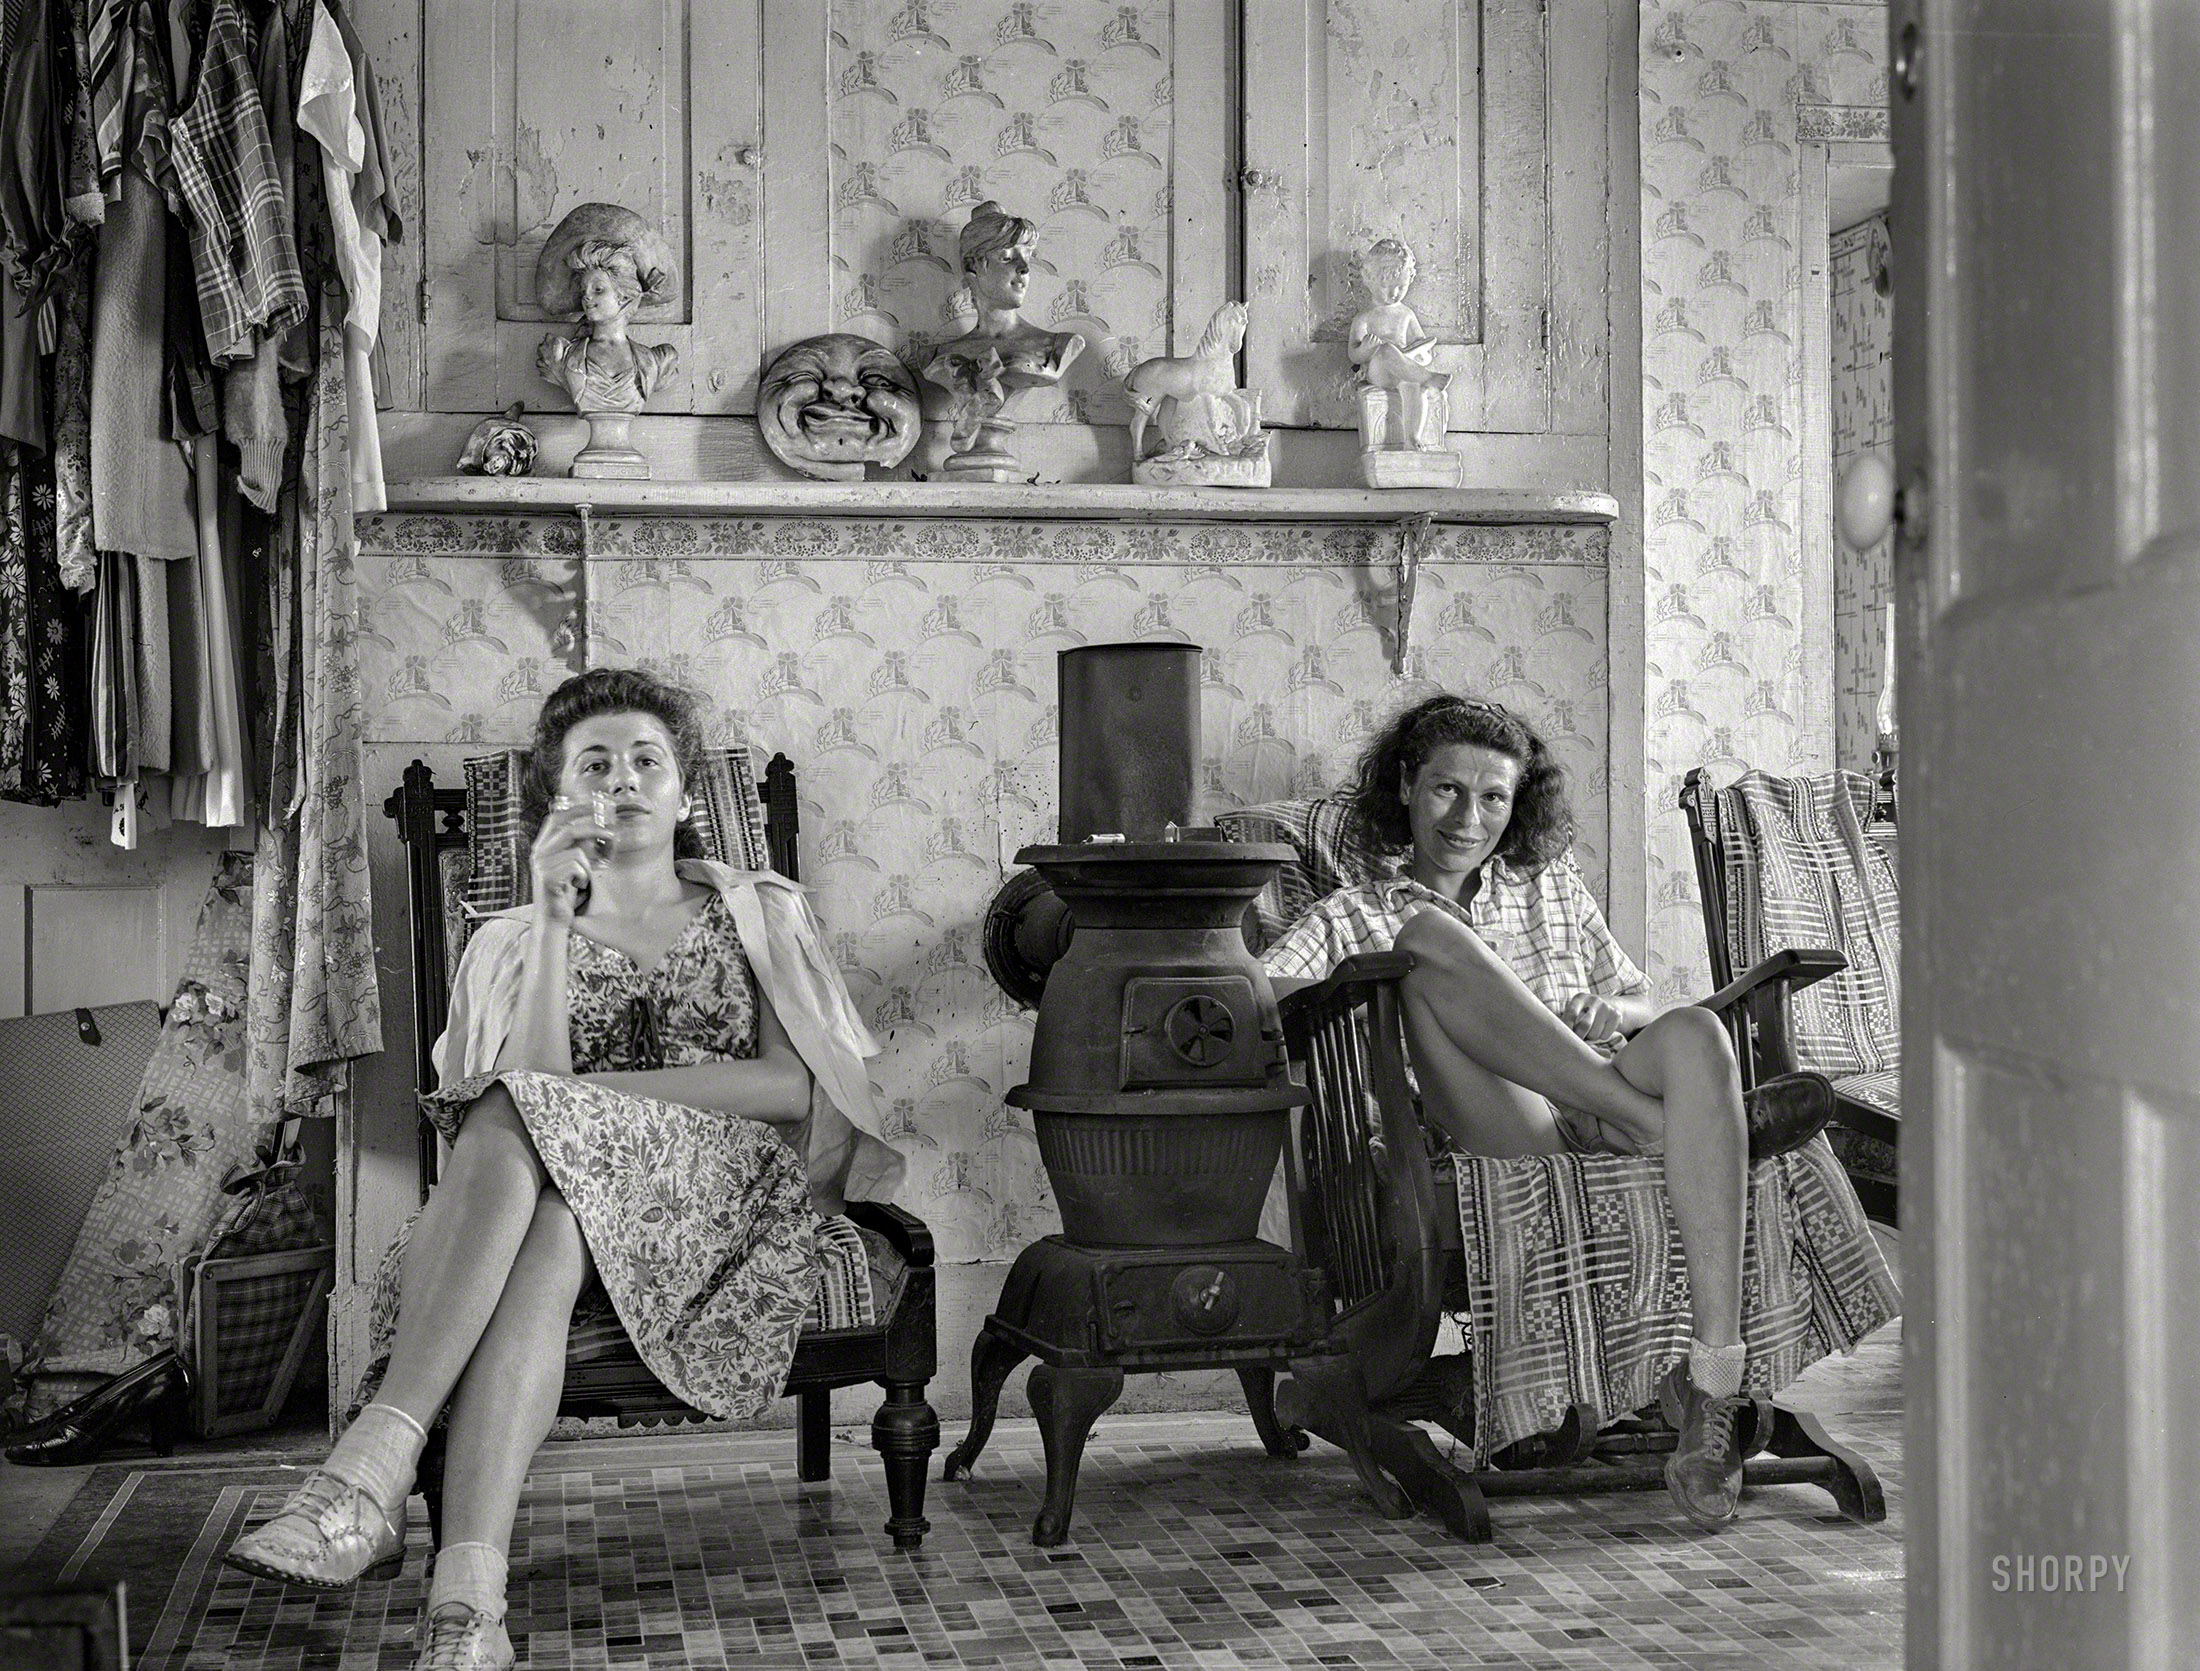 August 1940. Truro, Massachusetts. "Guests in bedroom of tourist house having a glass of whisky." Medium format negative by Edwin Rosskam. View full size.